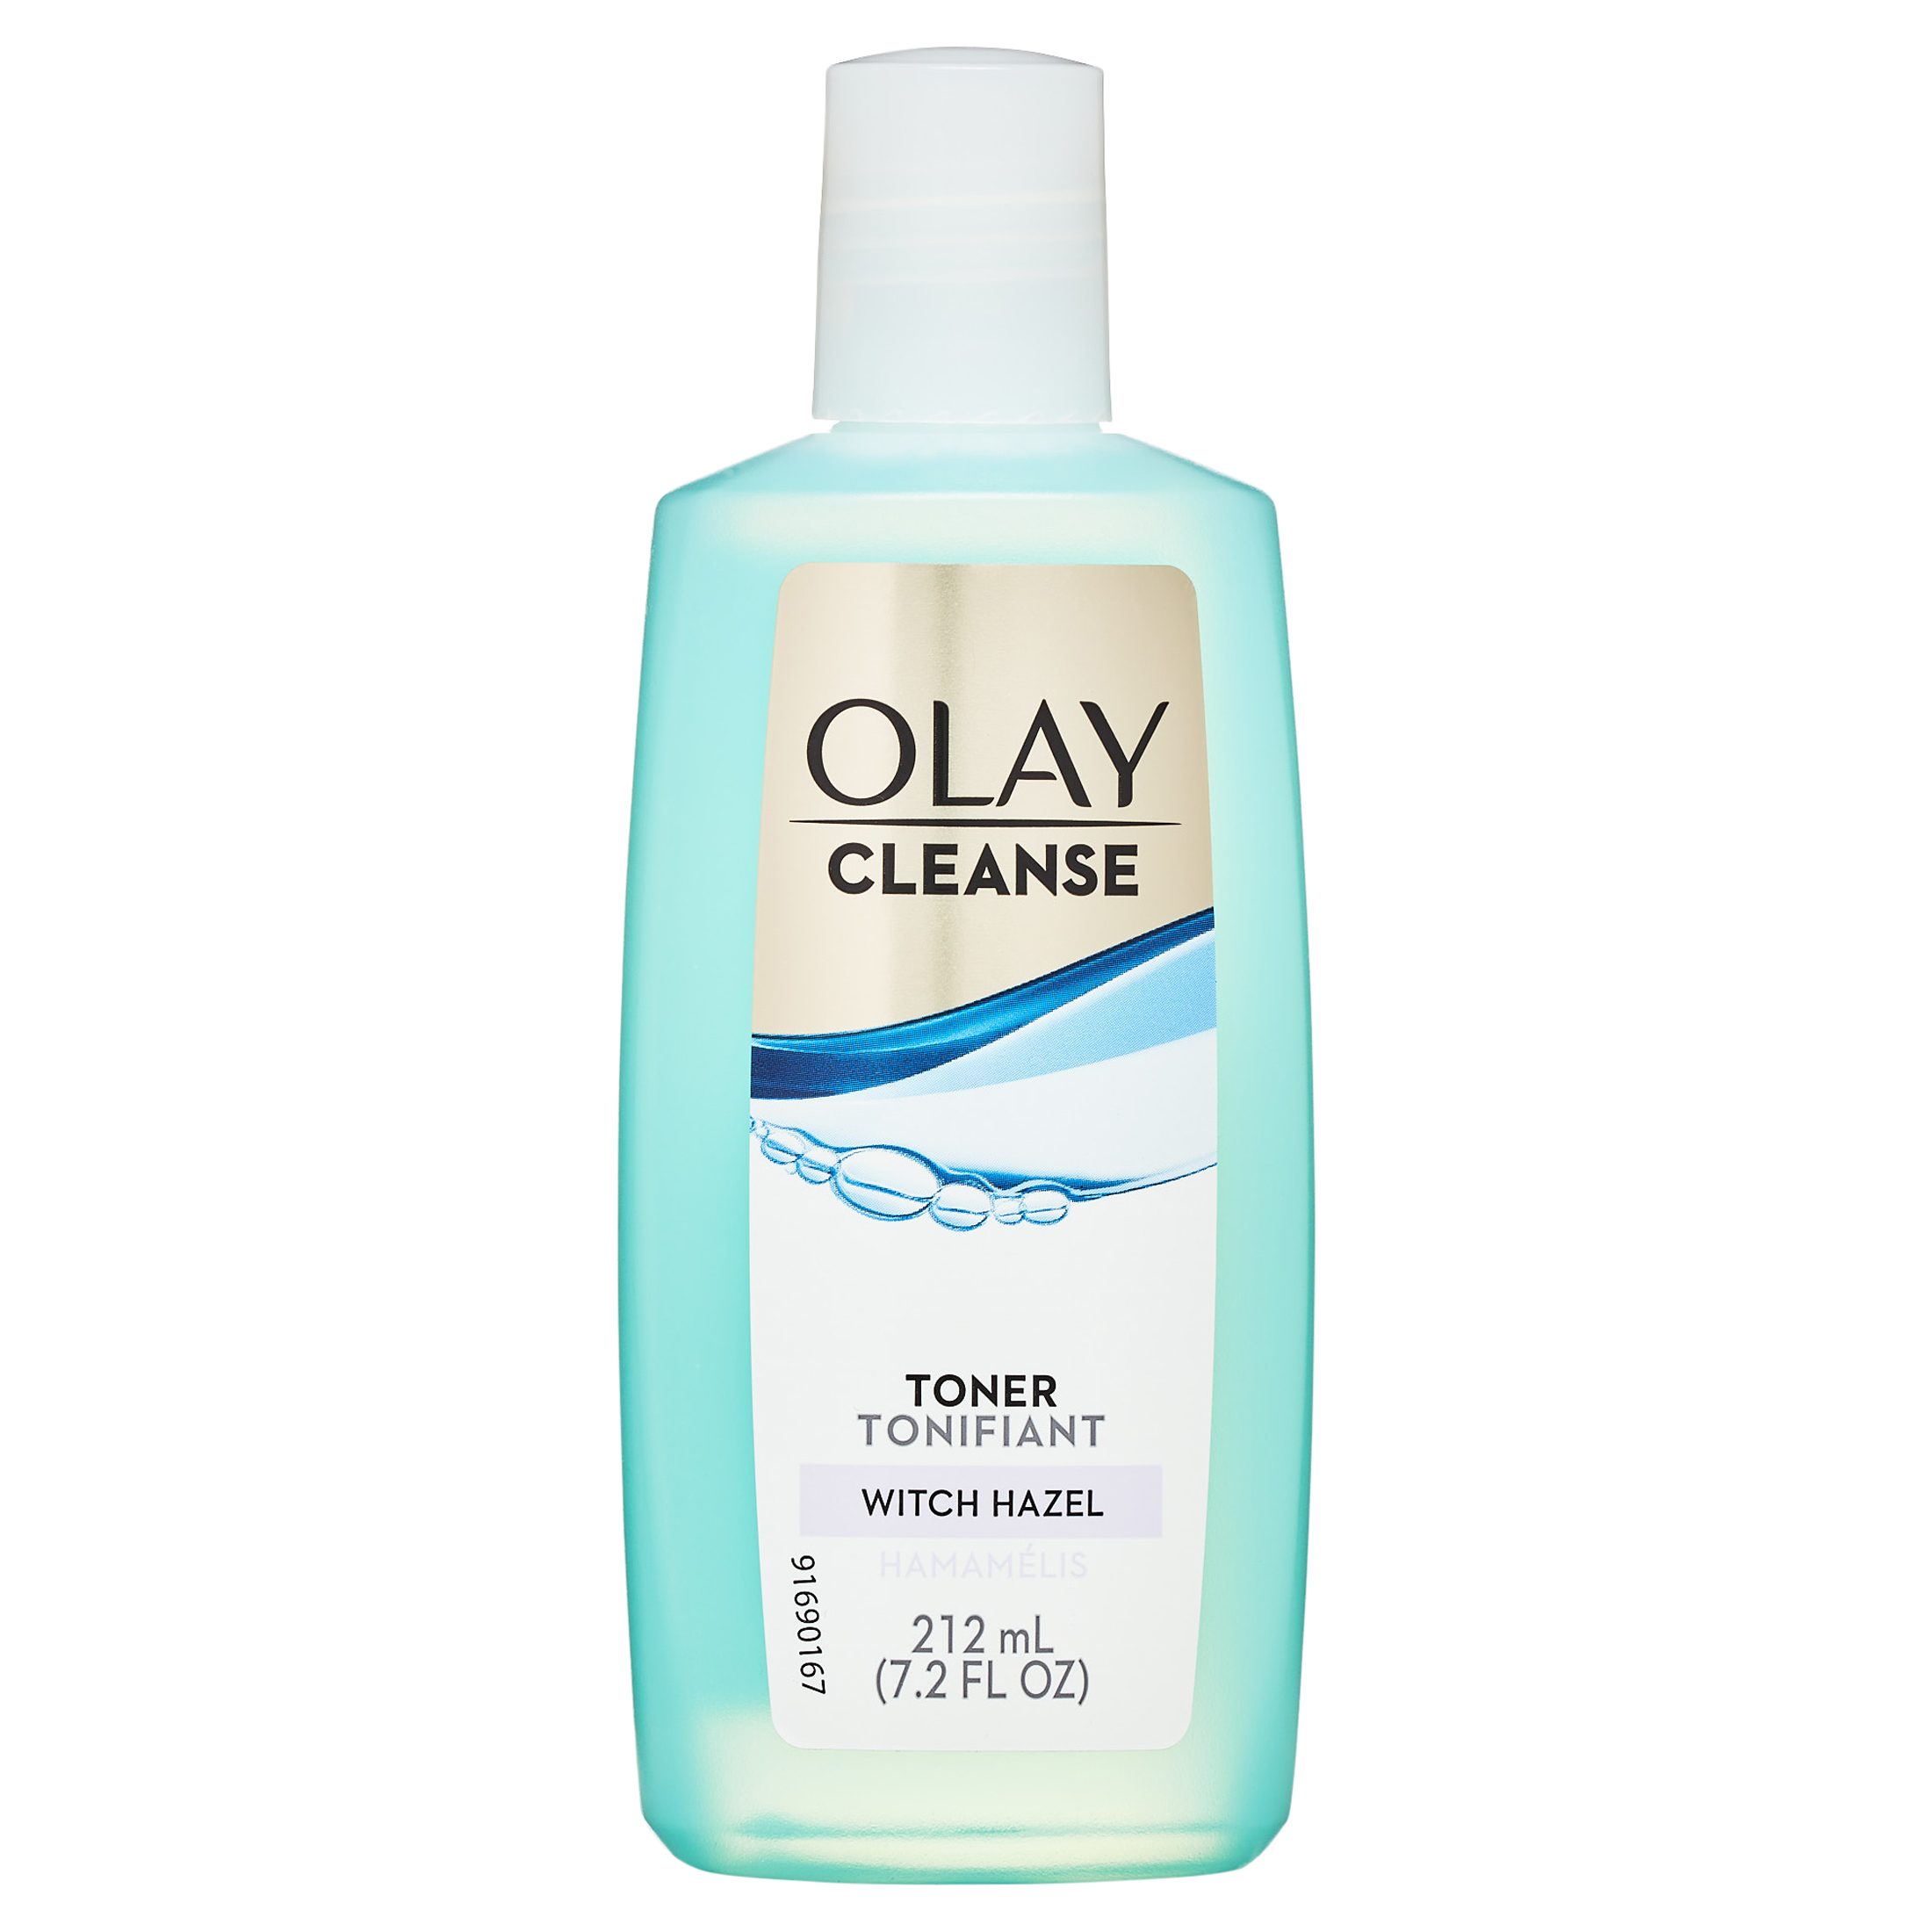 Olay Cleanse Witch Hazel Face Toner, Everyday Care for Combination & Oily Skin, 7.2 oz - image 1 of 7